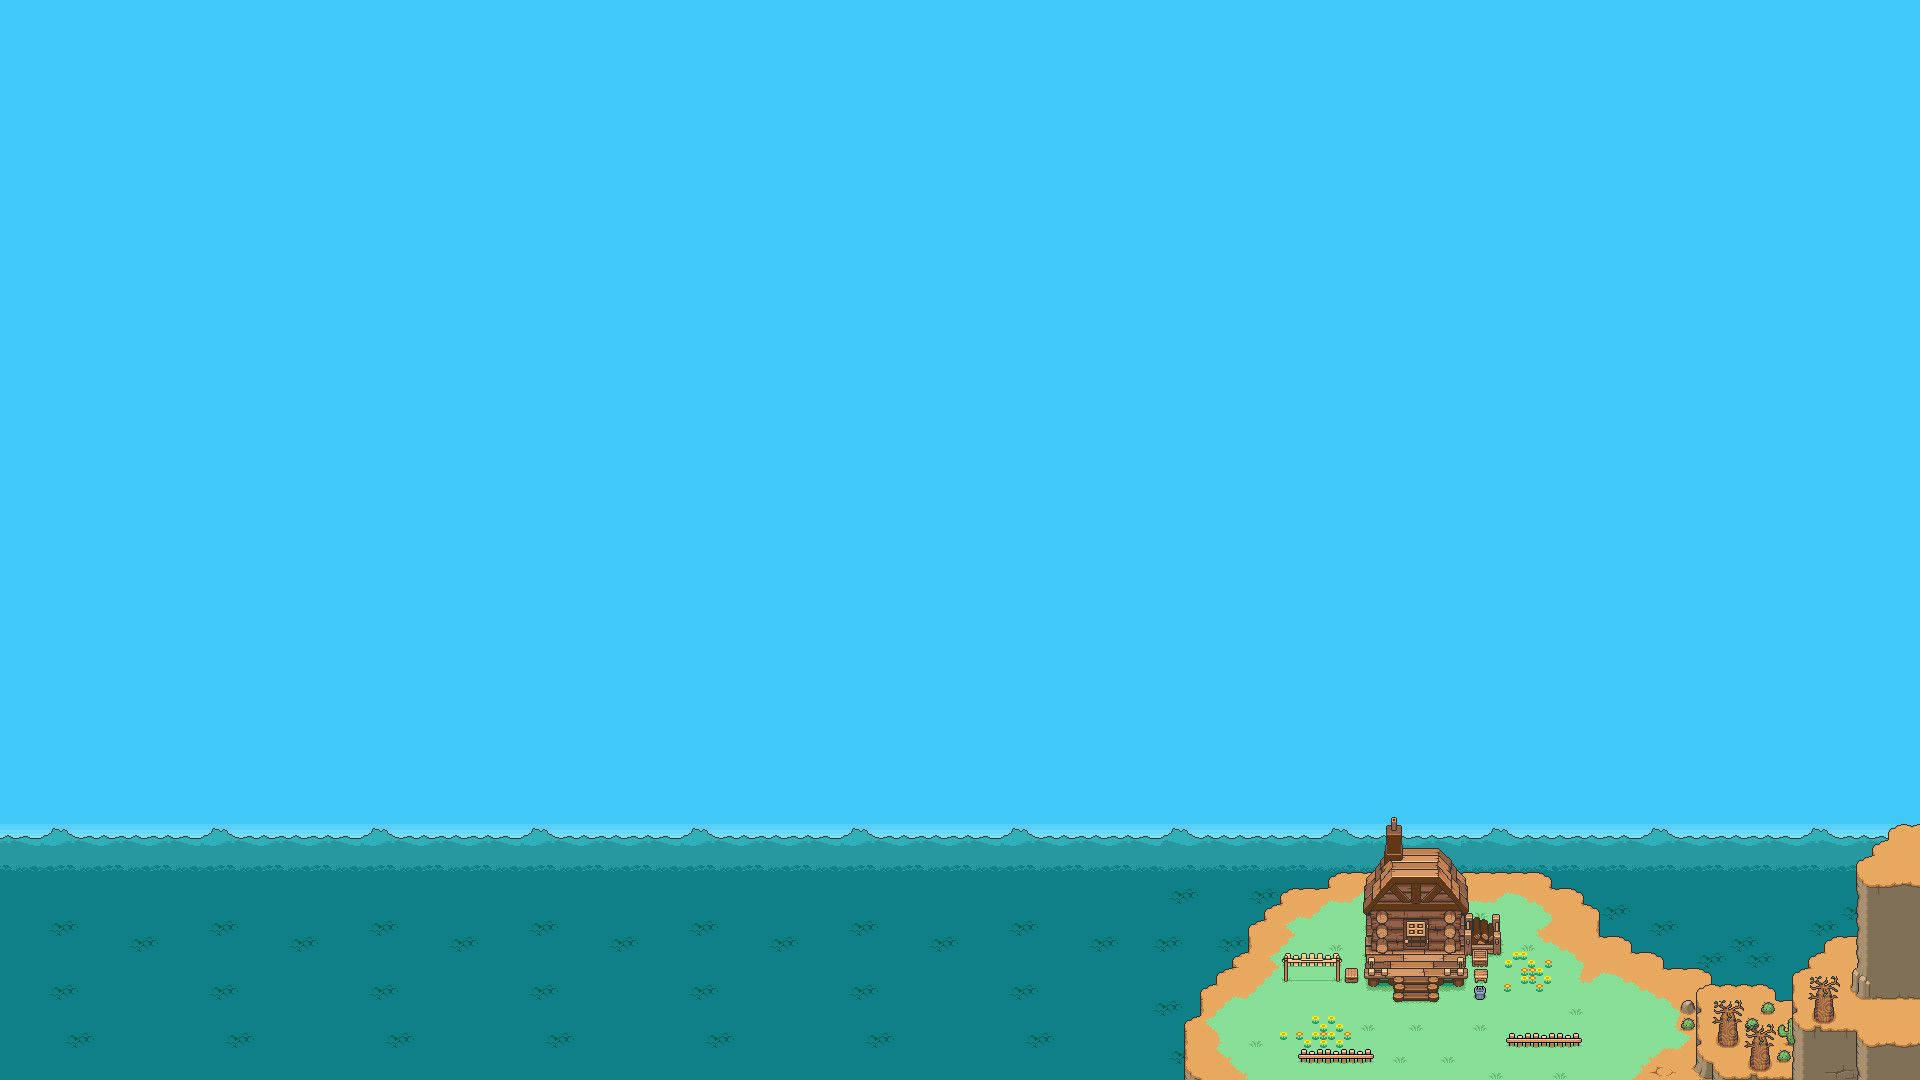 Earthbound House Beside The Ocean Background